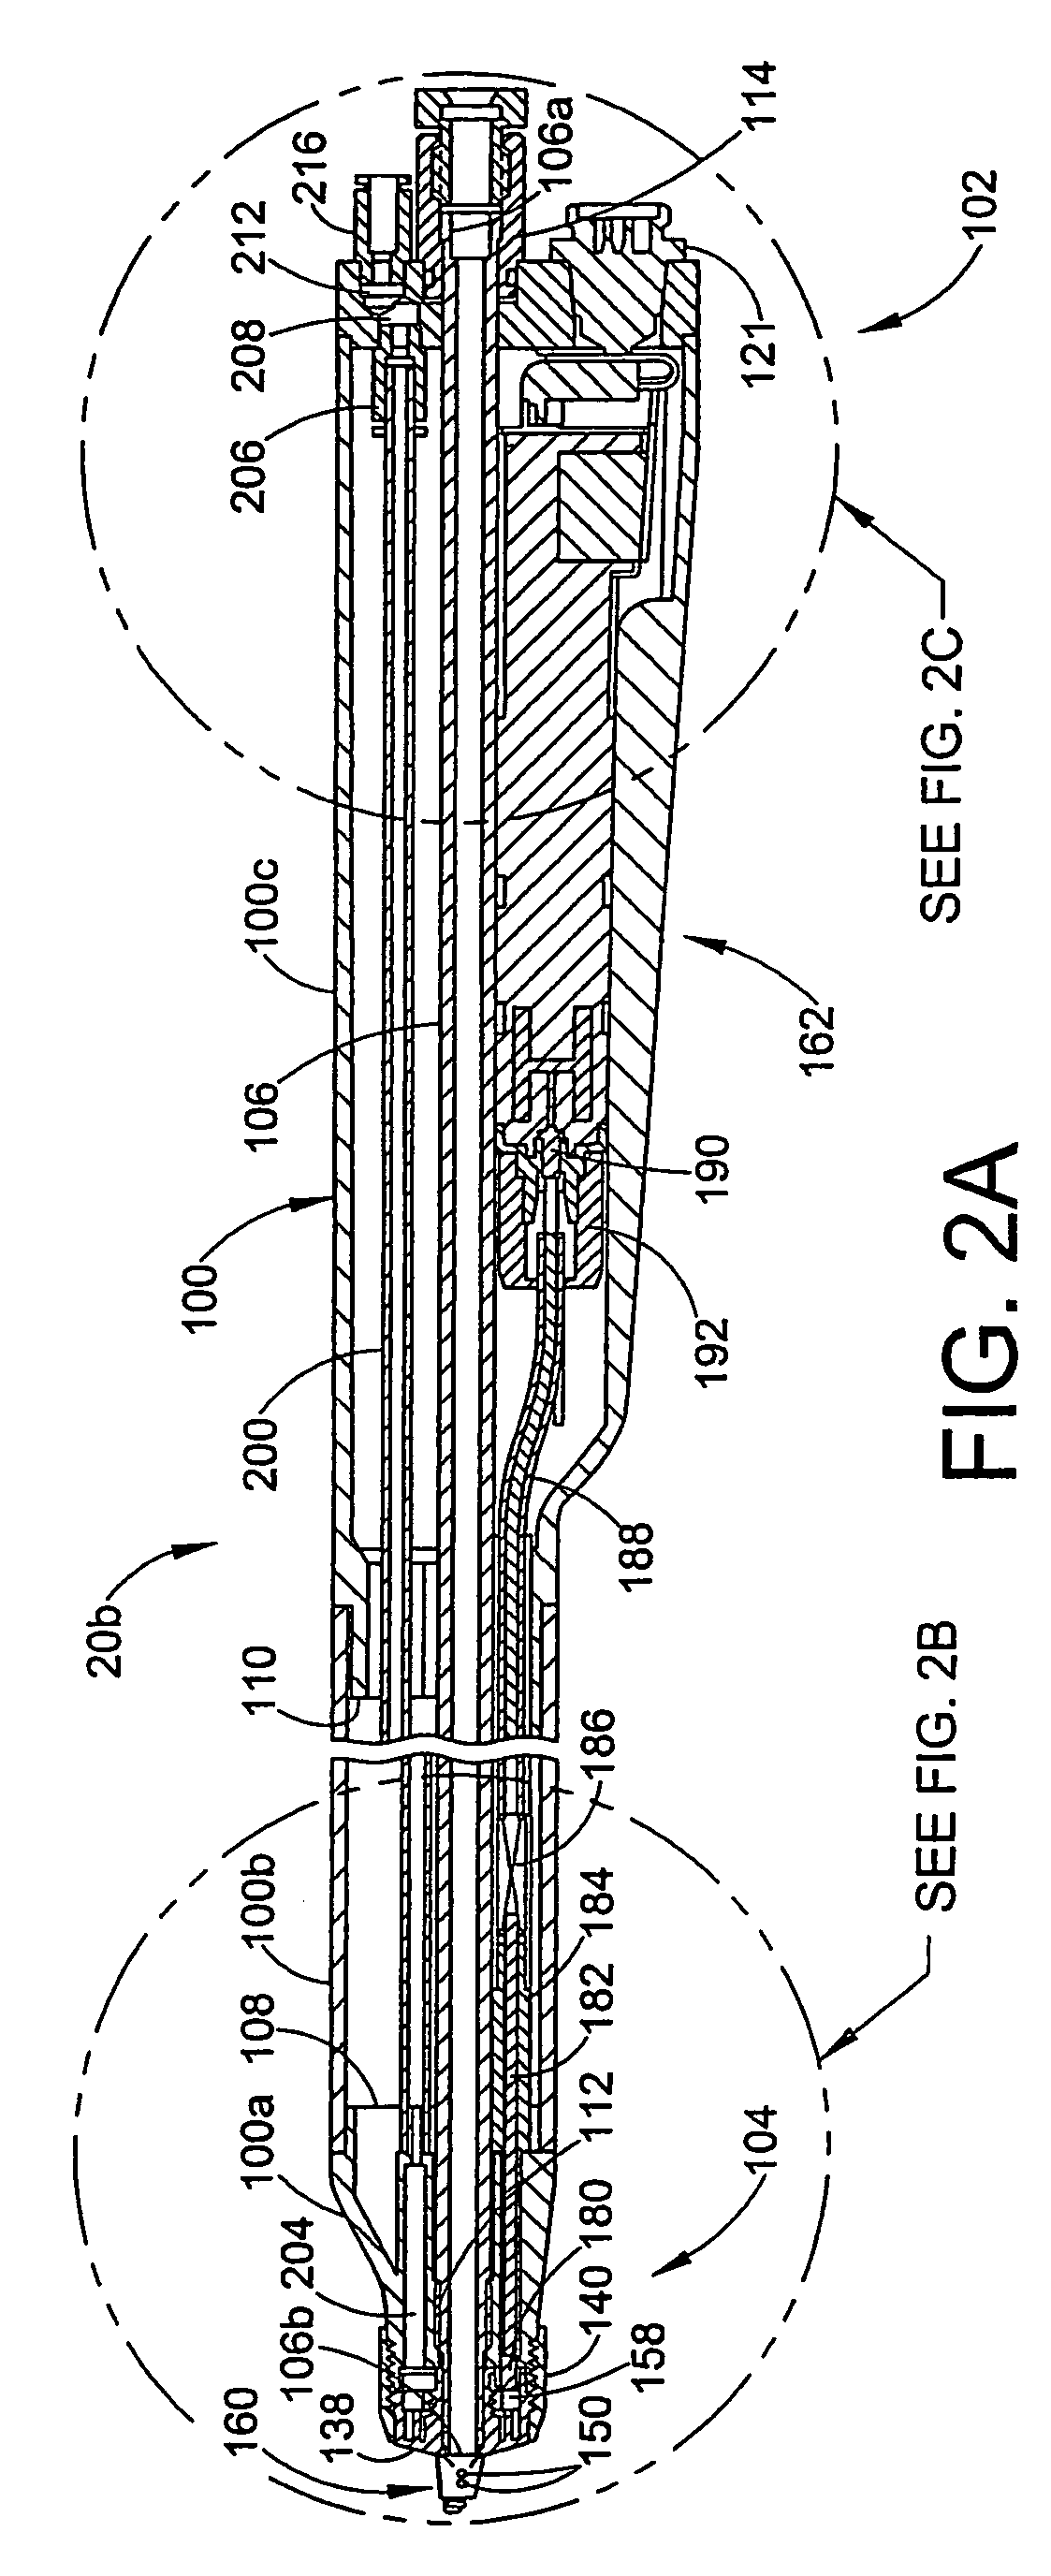 Particulate material applicator and pump